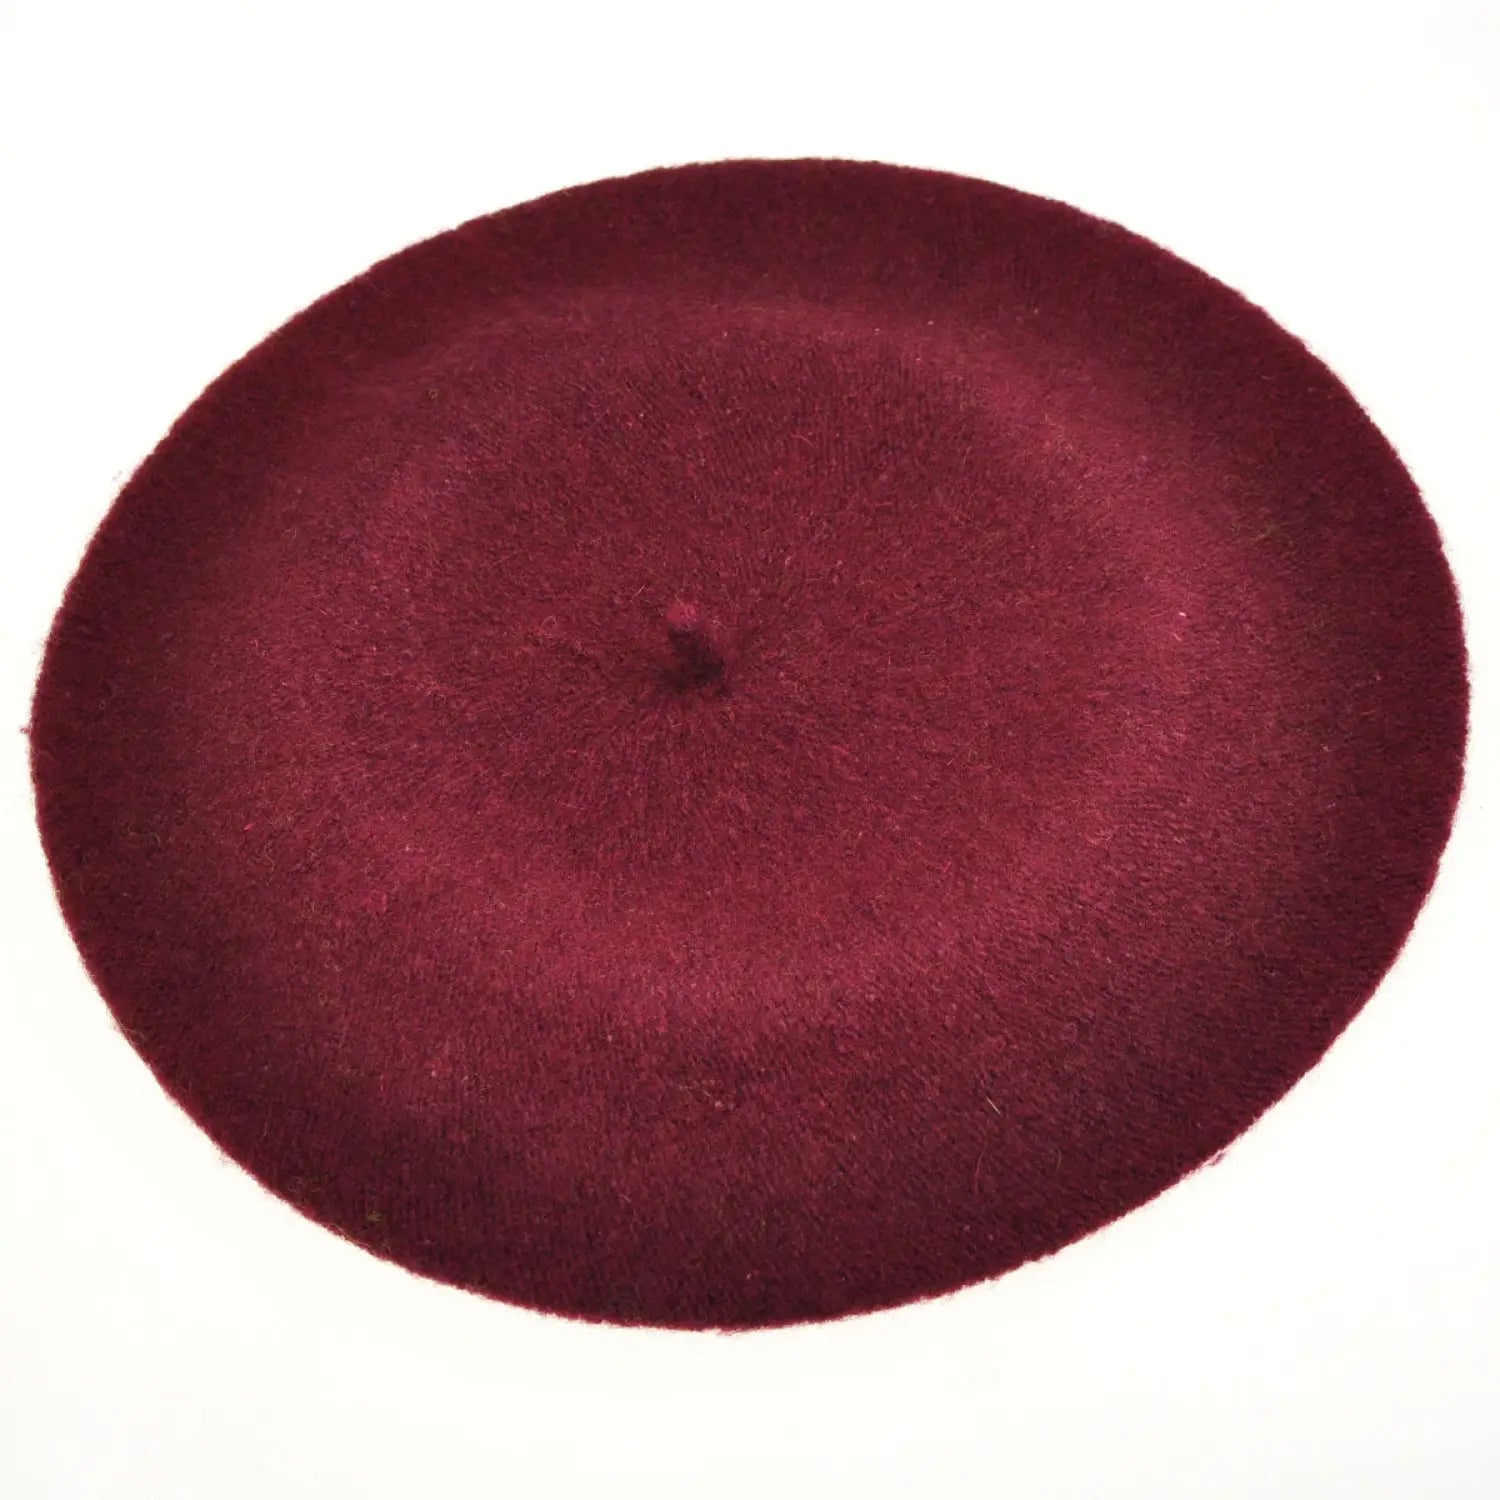 Red French wool beret on white background